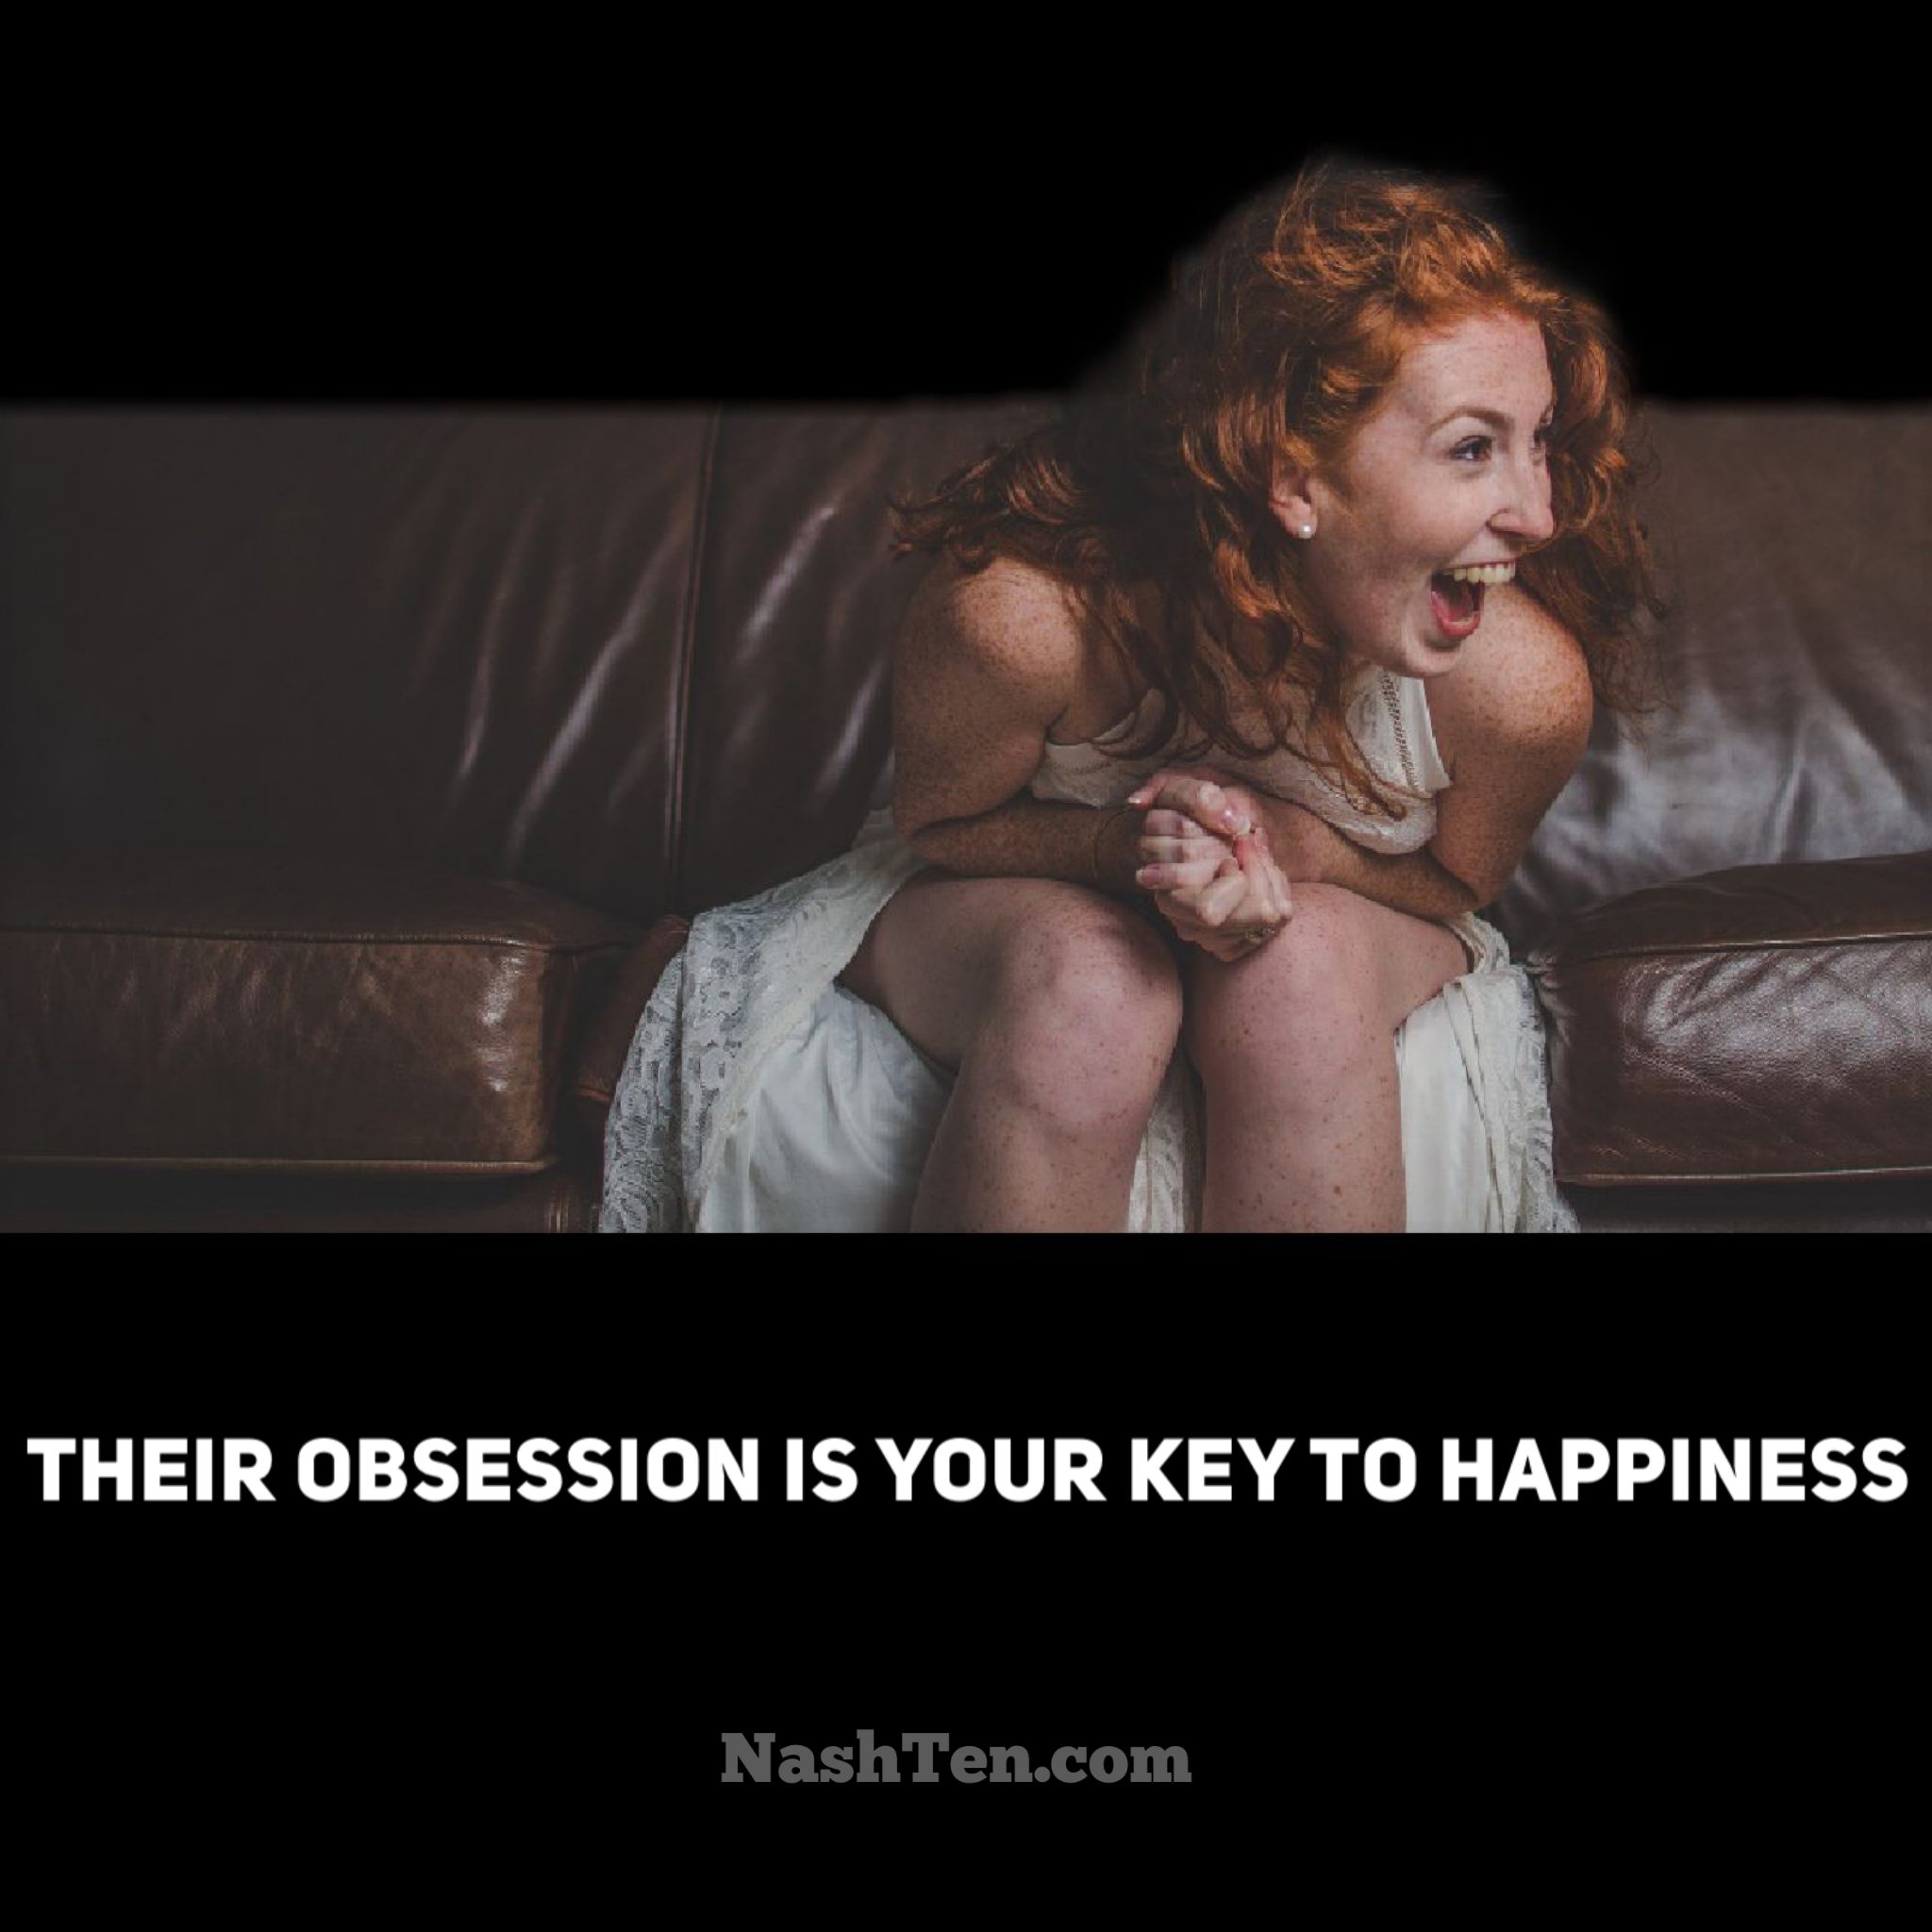 This obsession is your ticket to happiness